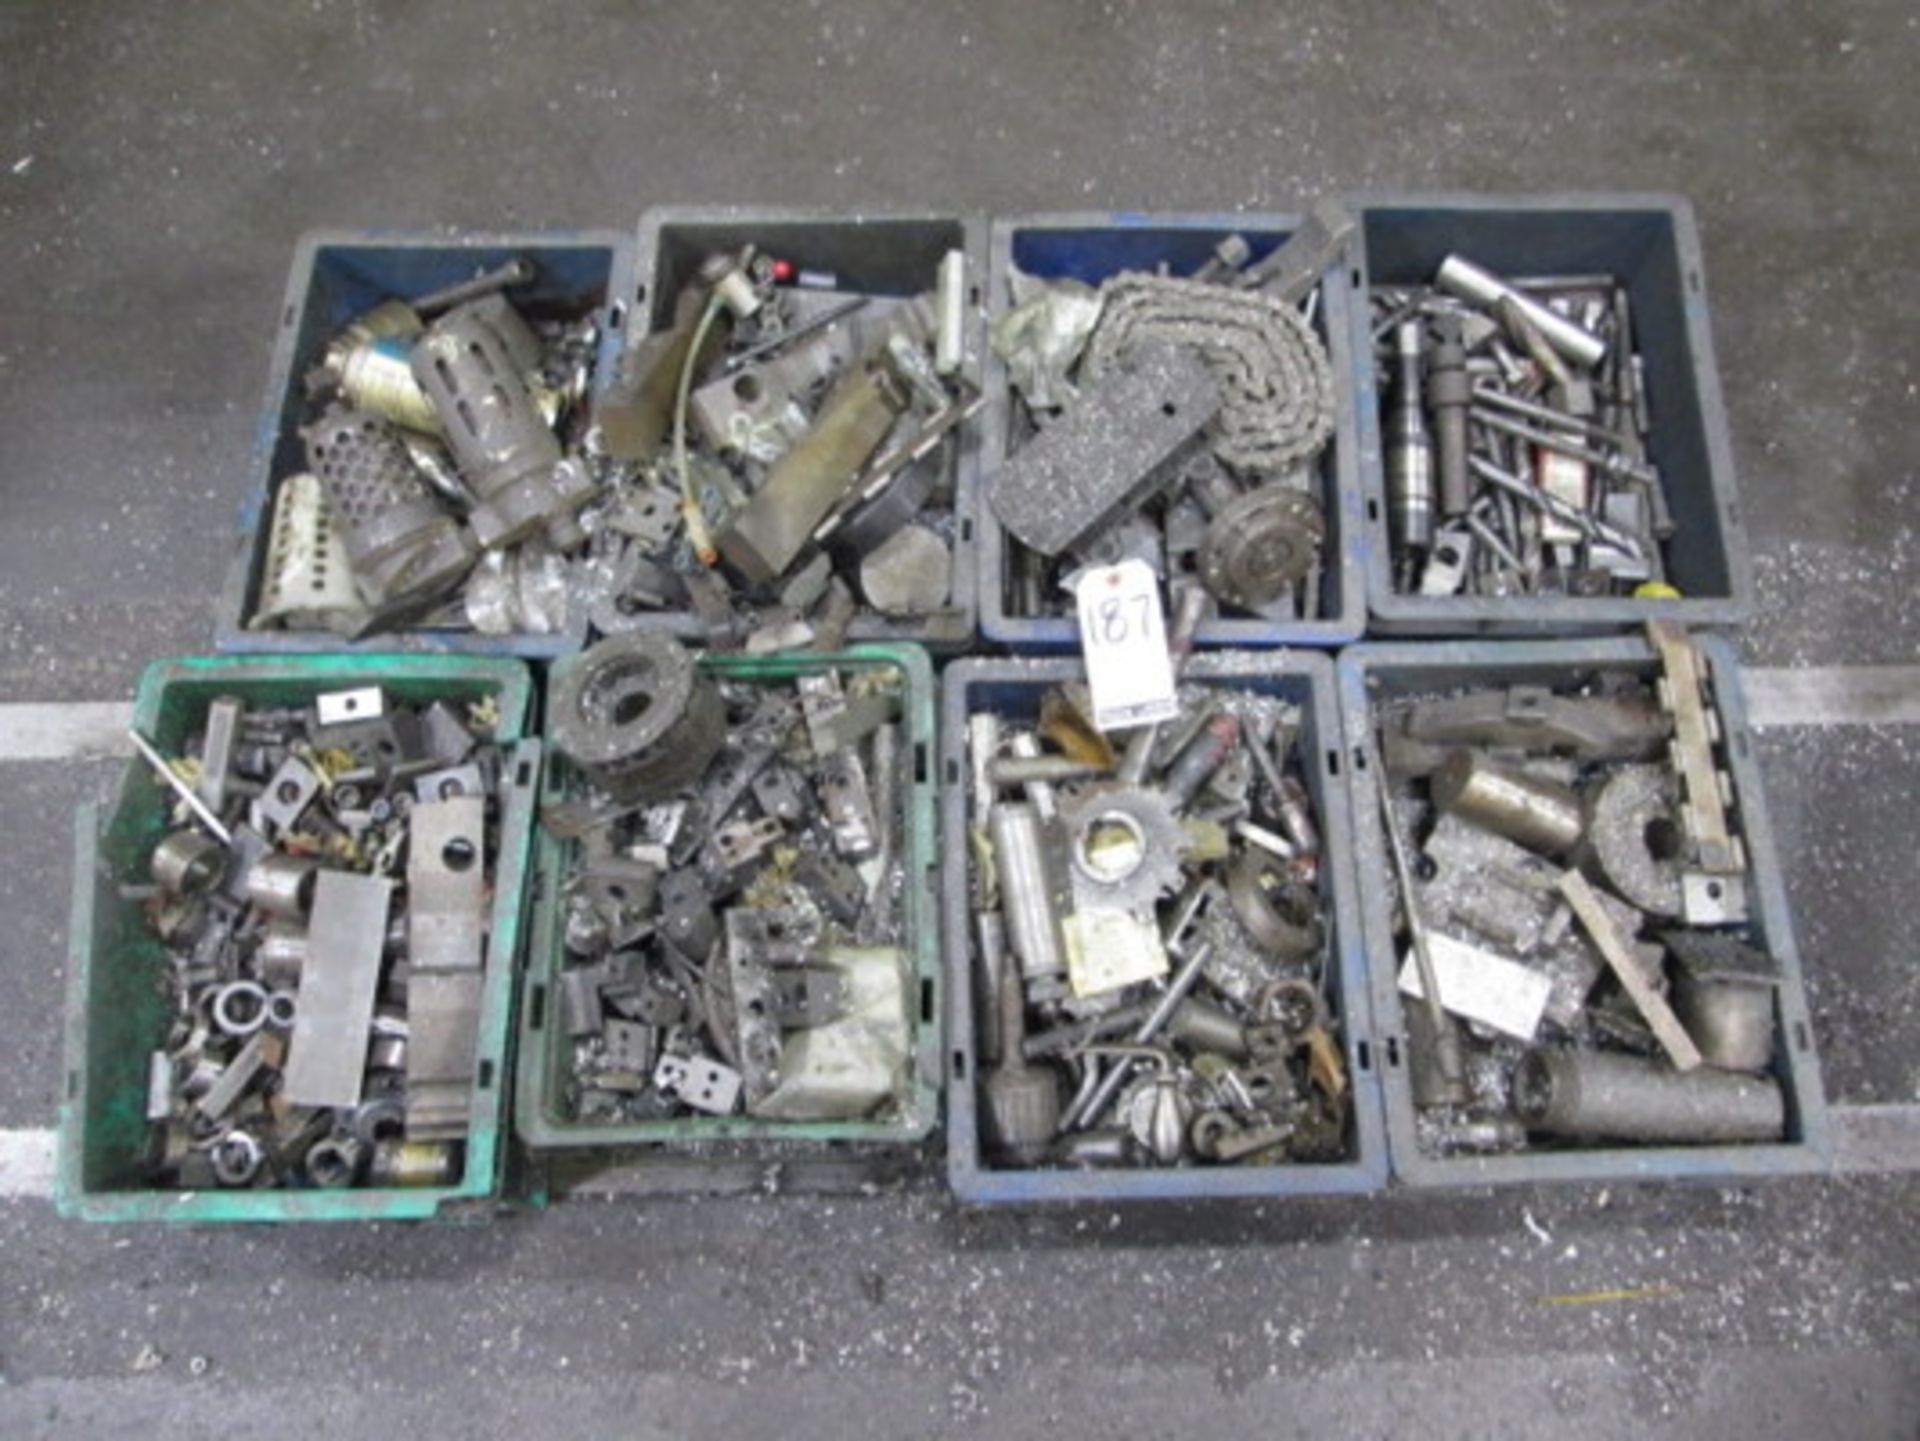 Lot (8) Bins Assorted Machine Tooling, Parts, Bolts And Clamps - Lot Location: CNC Lathe/Mill - Site